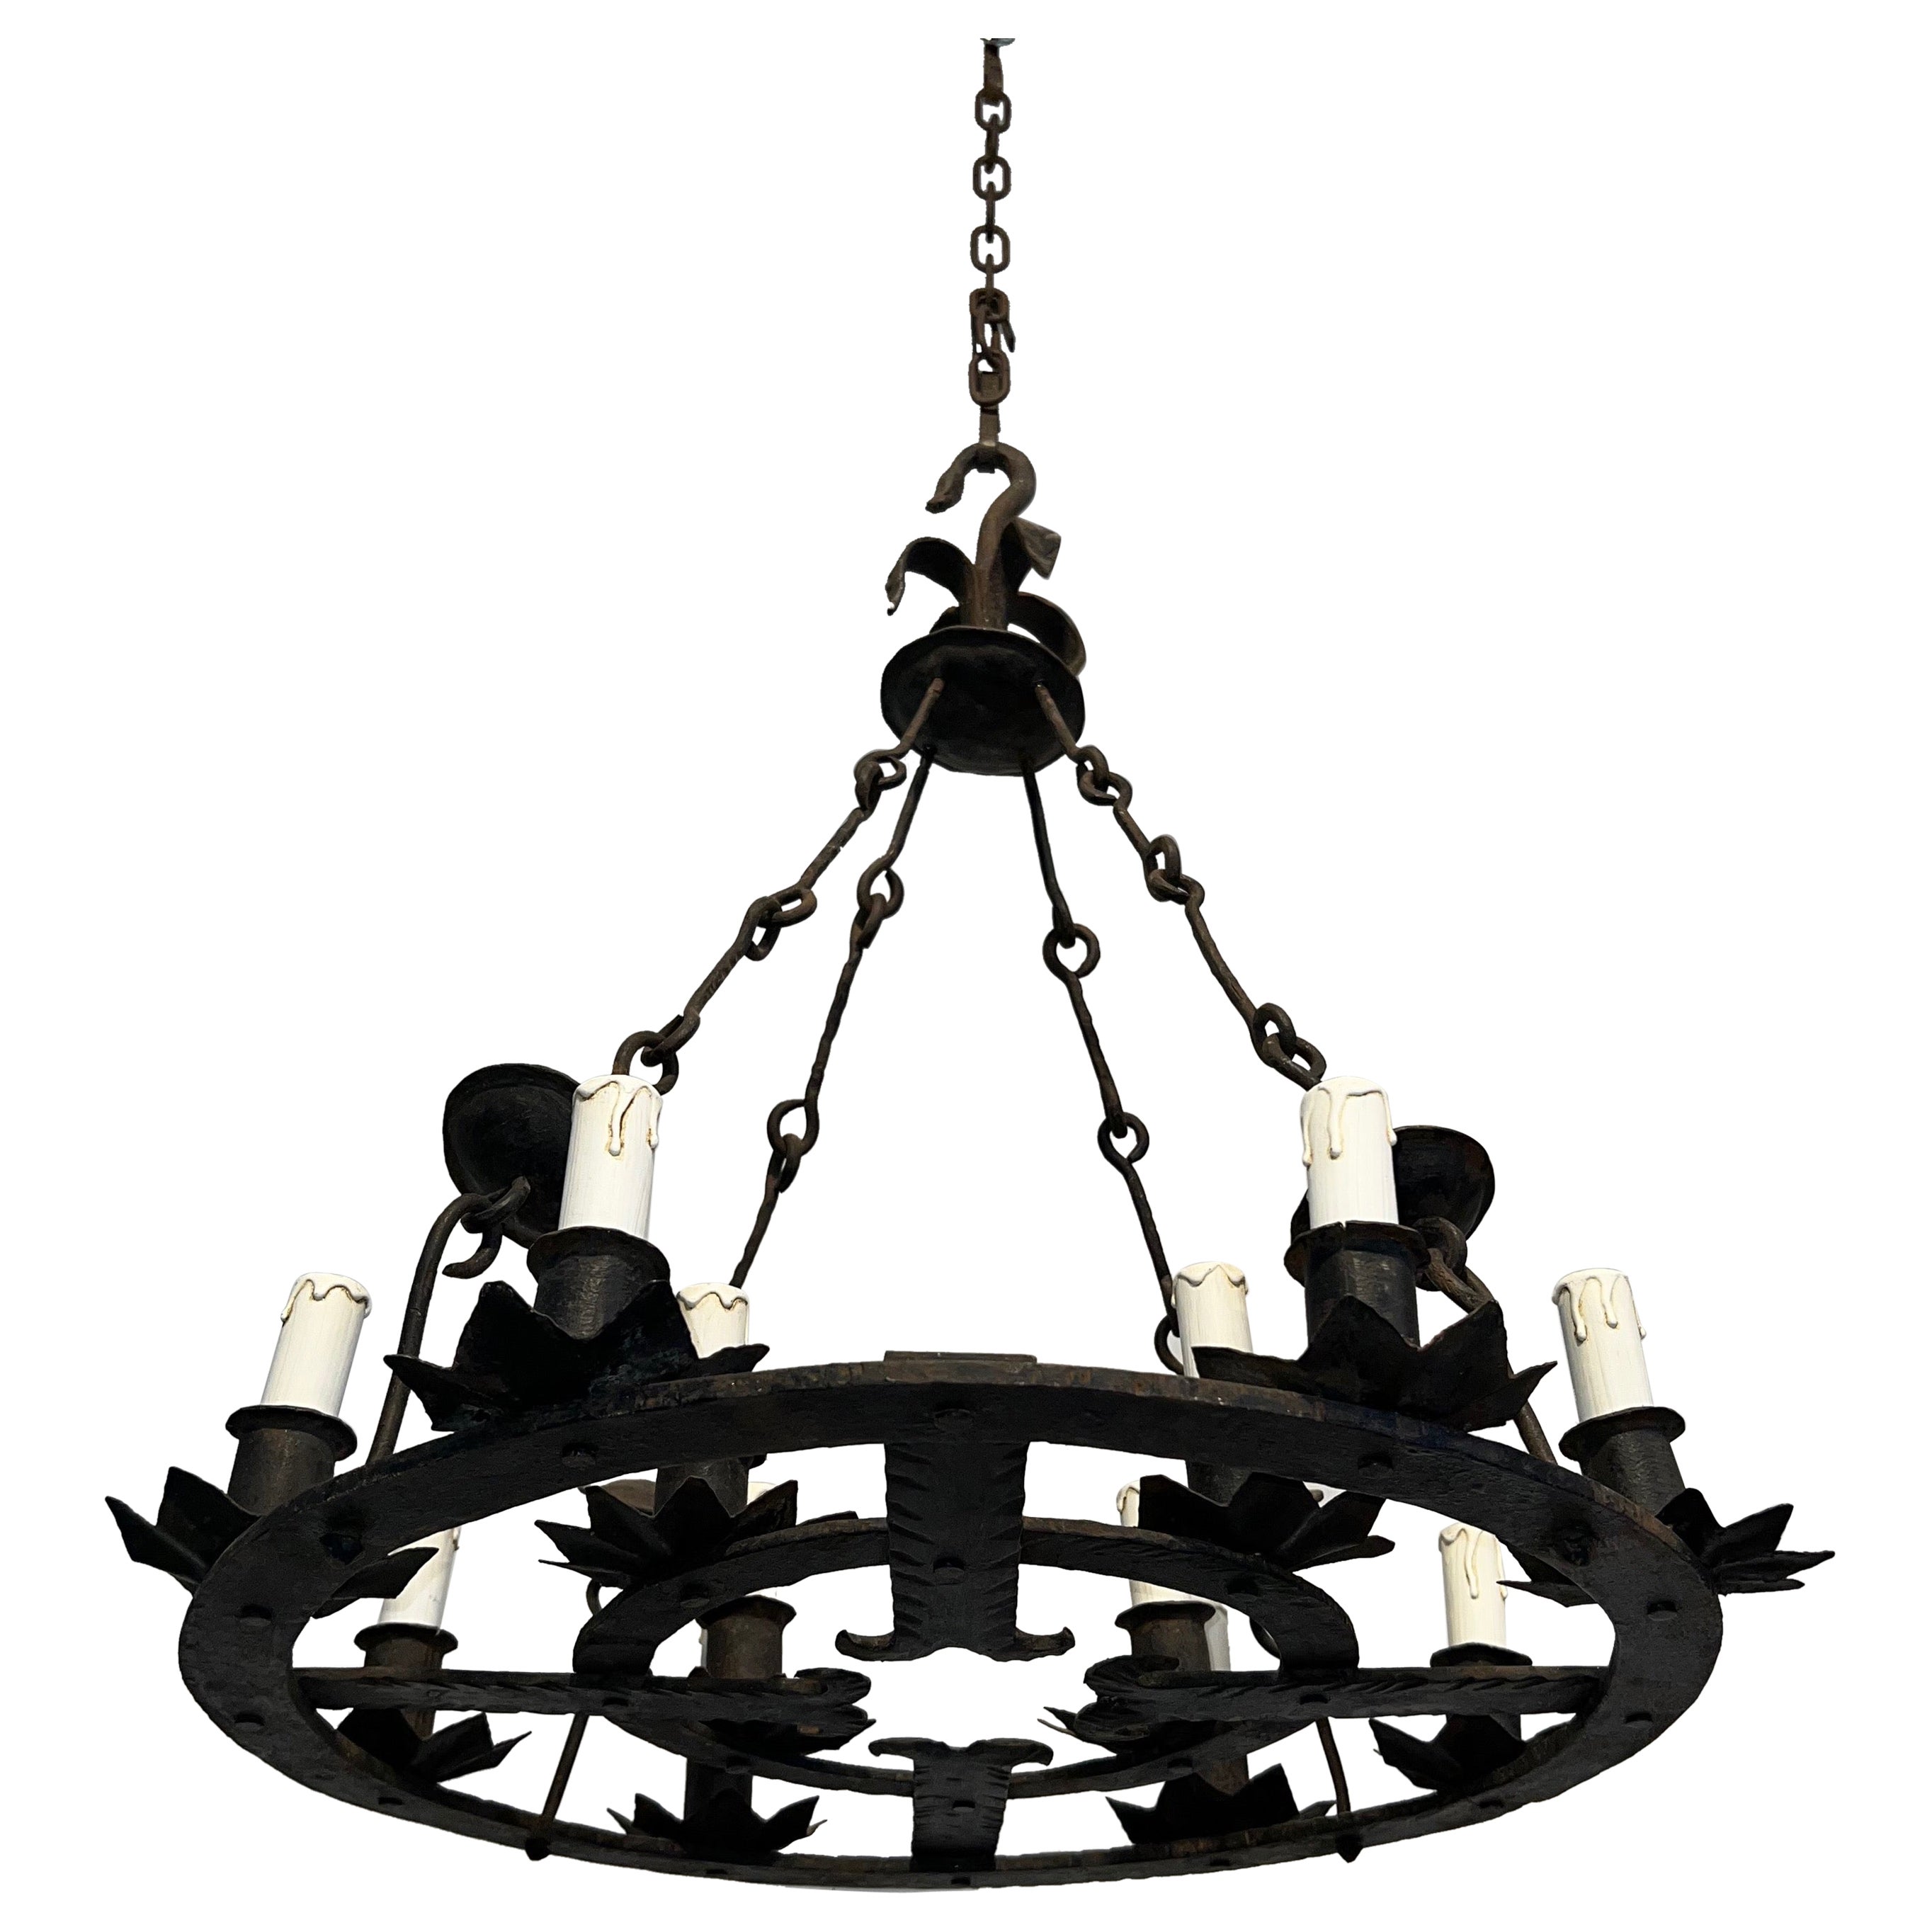 Wrought Iron Chandelier with 12 Lights in the Gothic Style. Circa 1950